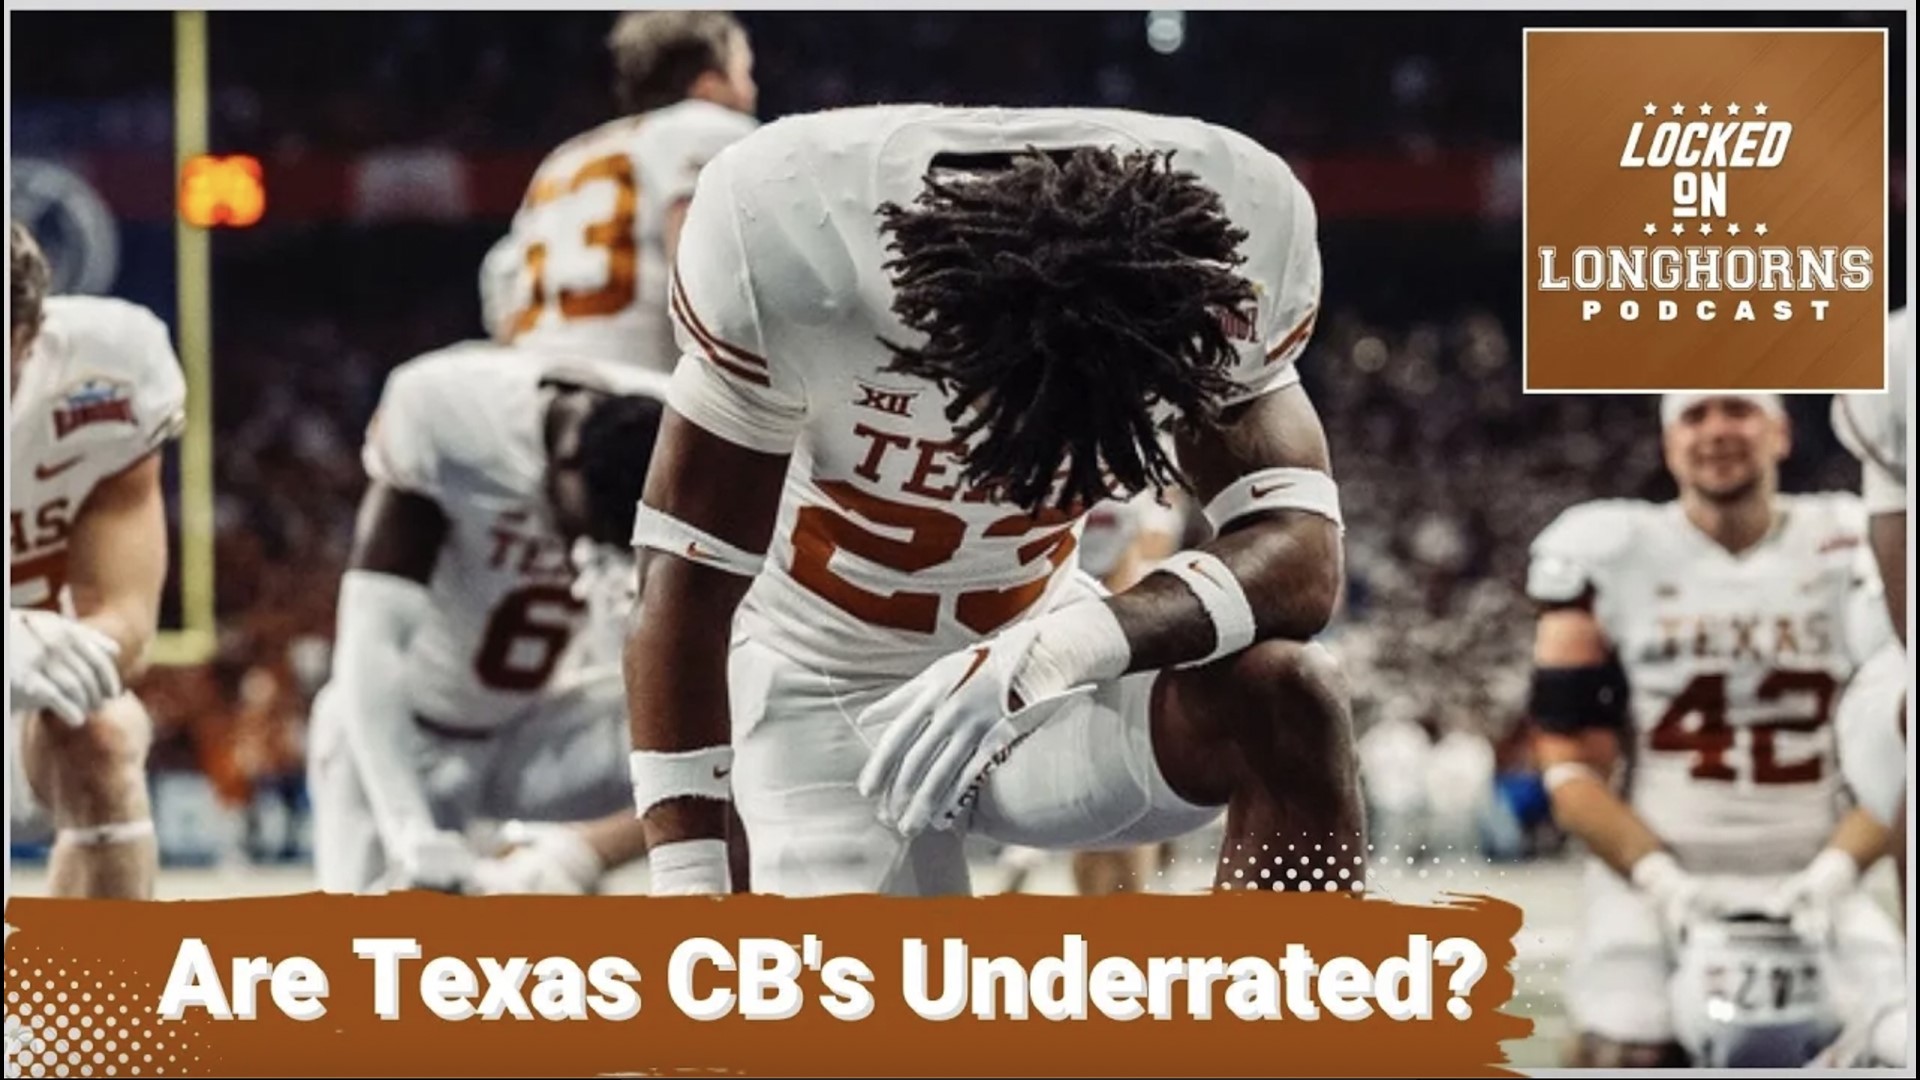 ​On3sports has continued their Top 10 list amongst various units and coaching staffs in college football to give fans a glimpse of what to expect during 2023